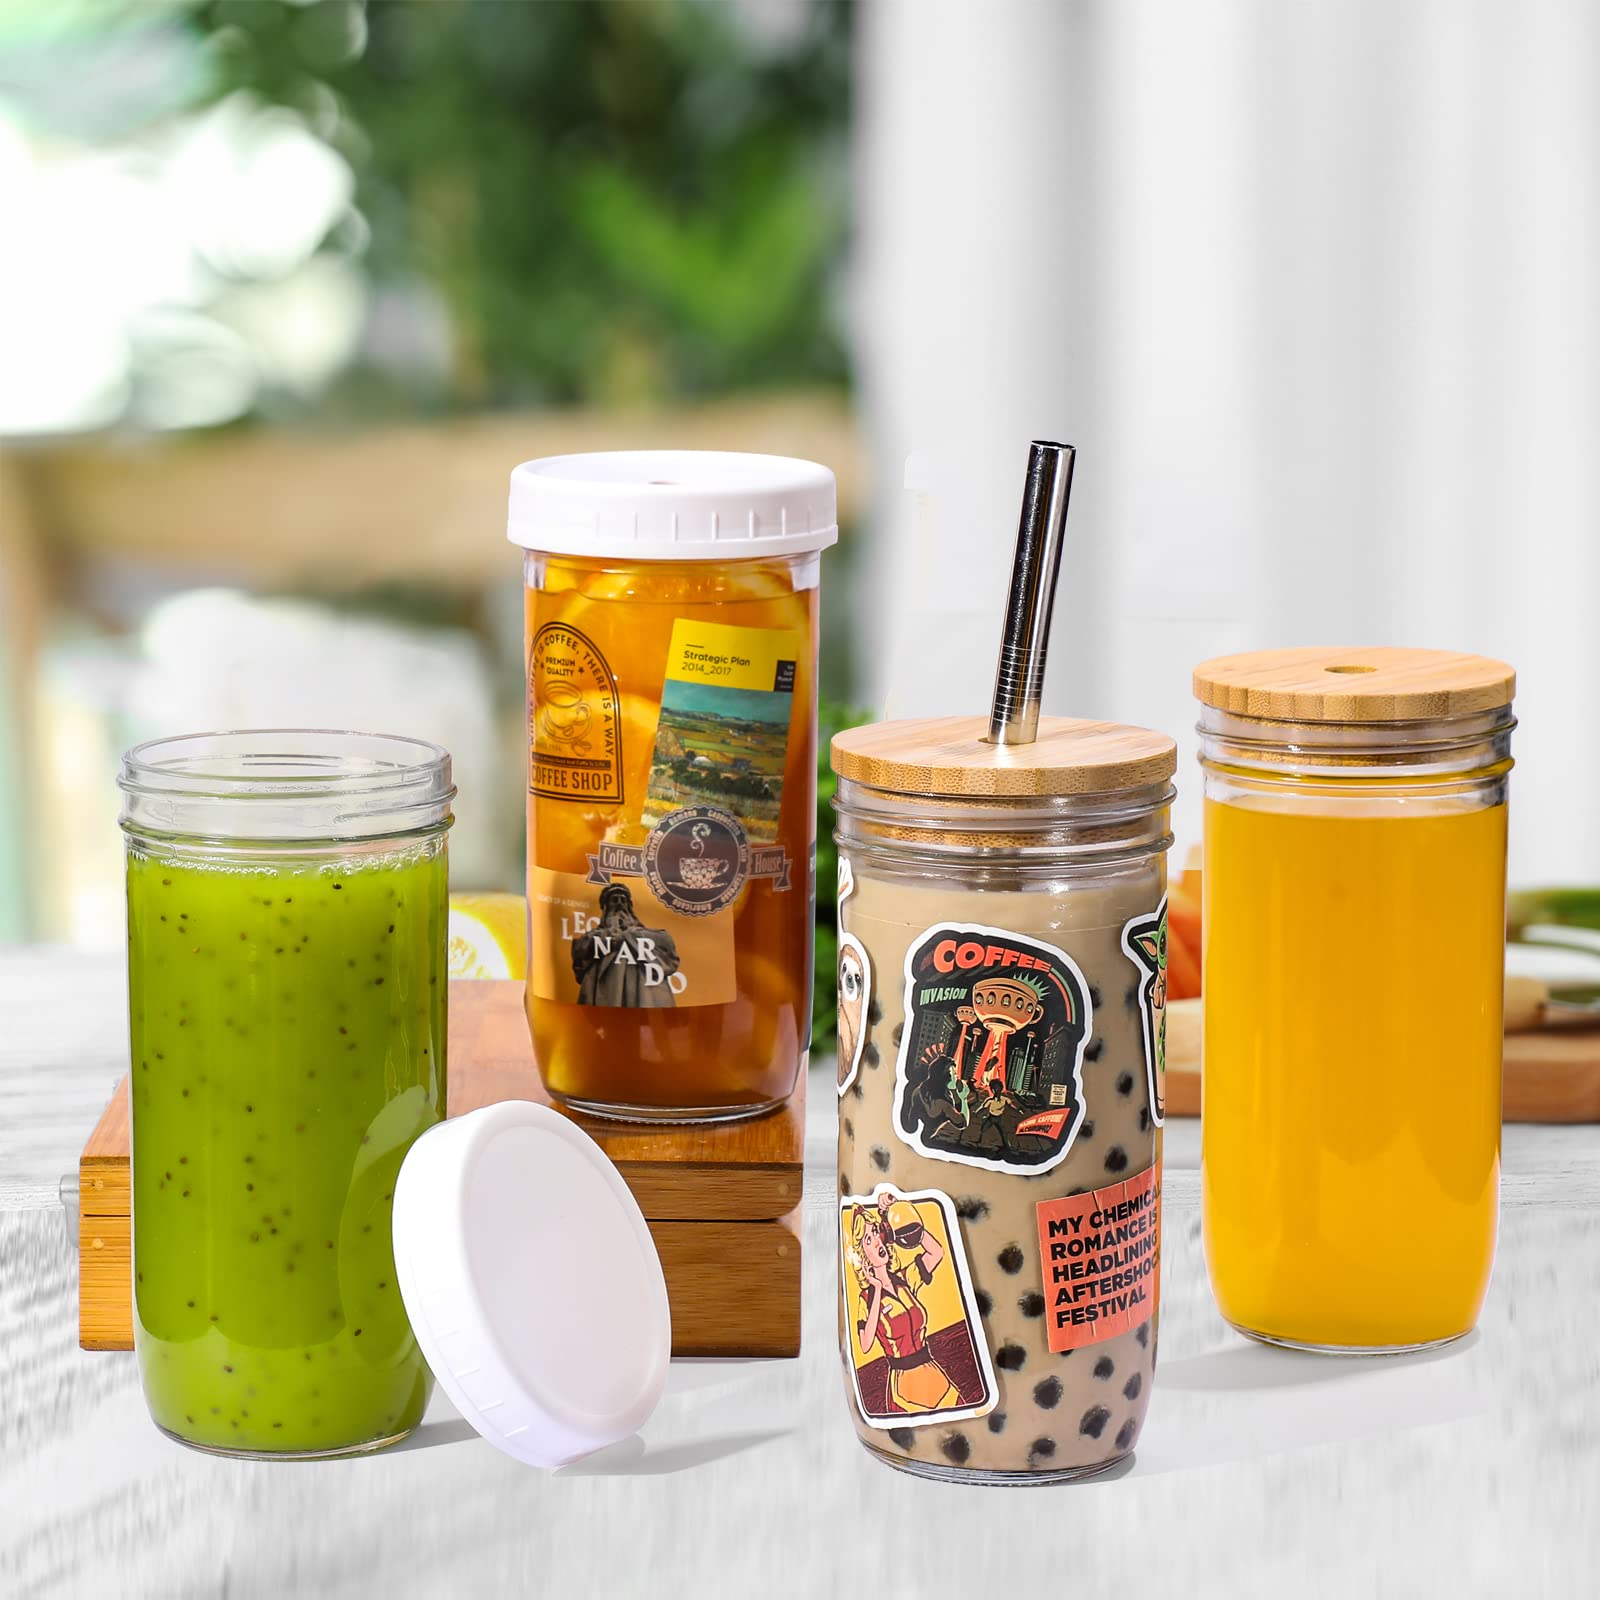 [ 4 Pack ] Glass Cups Set - 24oz Mason Jar Drinking Glasses w Bamboo Lids & Straws & 2 Airtight Lids - Cute Reusable Boba Bottle, Iced Coffee Glasses, Travel Tumbler for Bubble Tea, smoothie, Juice